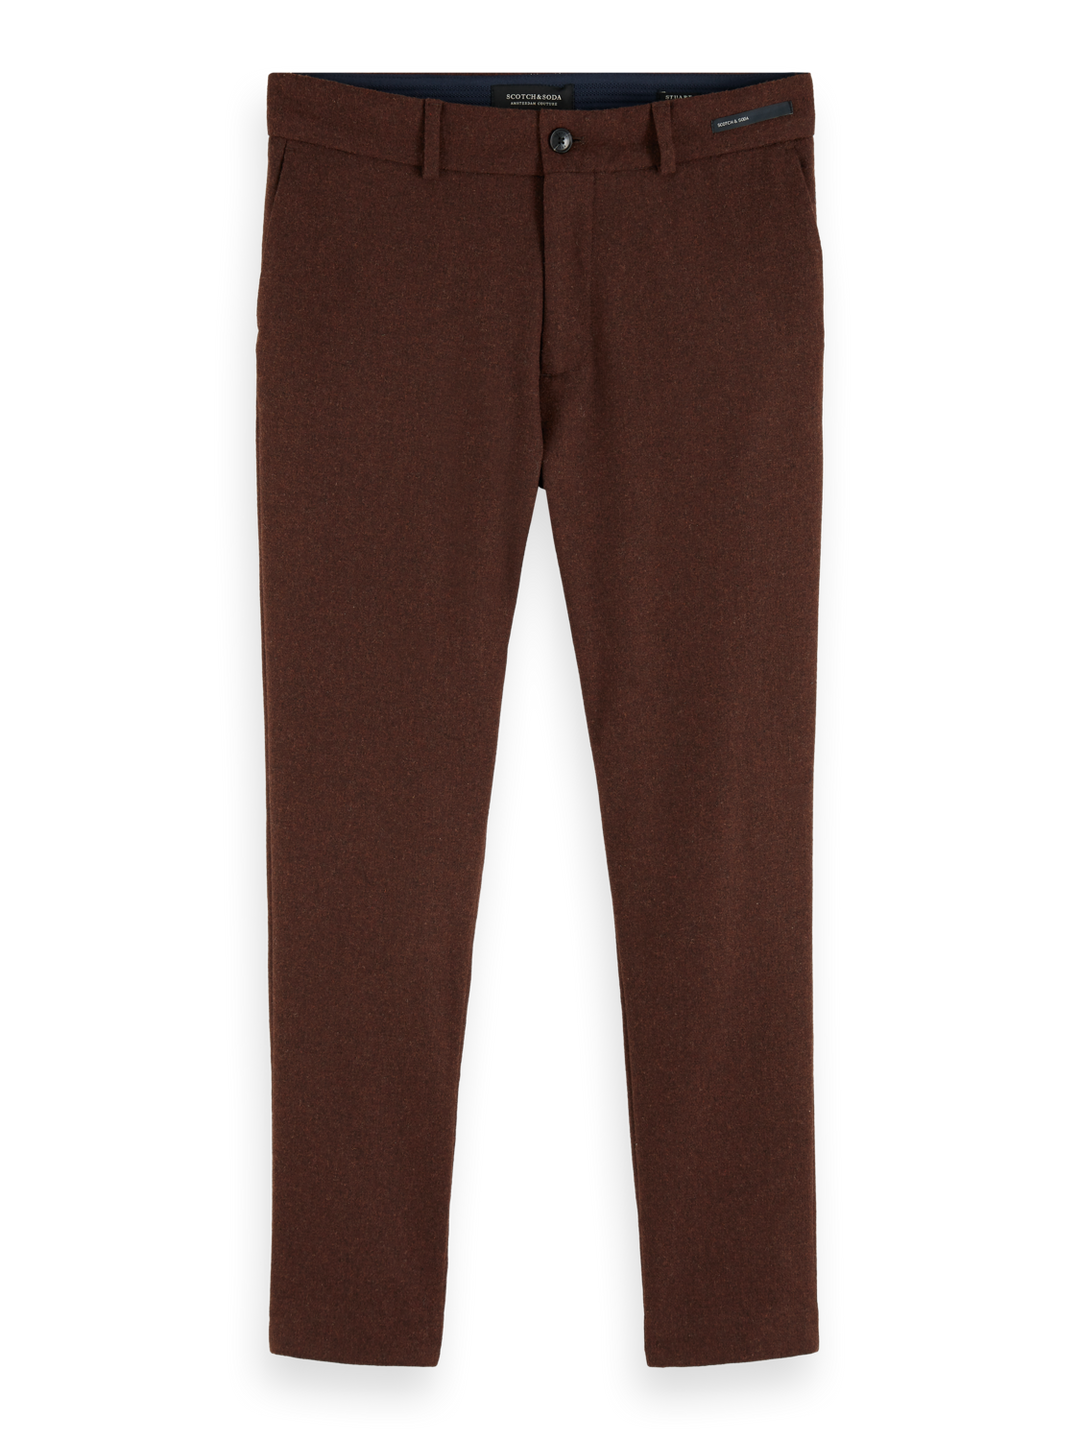 Scotch & Soda - Stuart Stretch Wool-Blend Chino in Brown Melange | Buster McGee